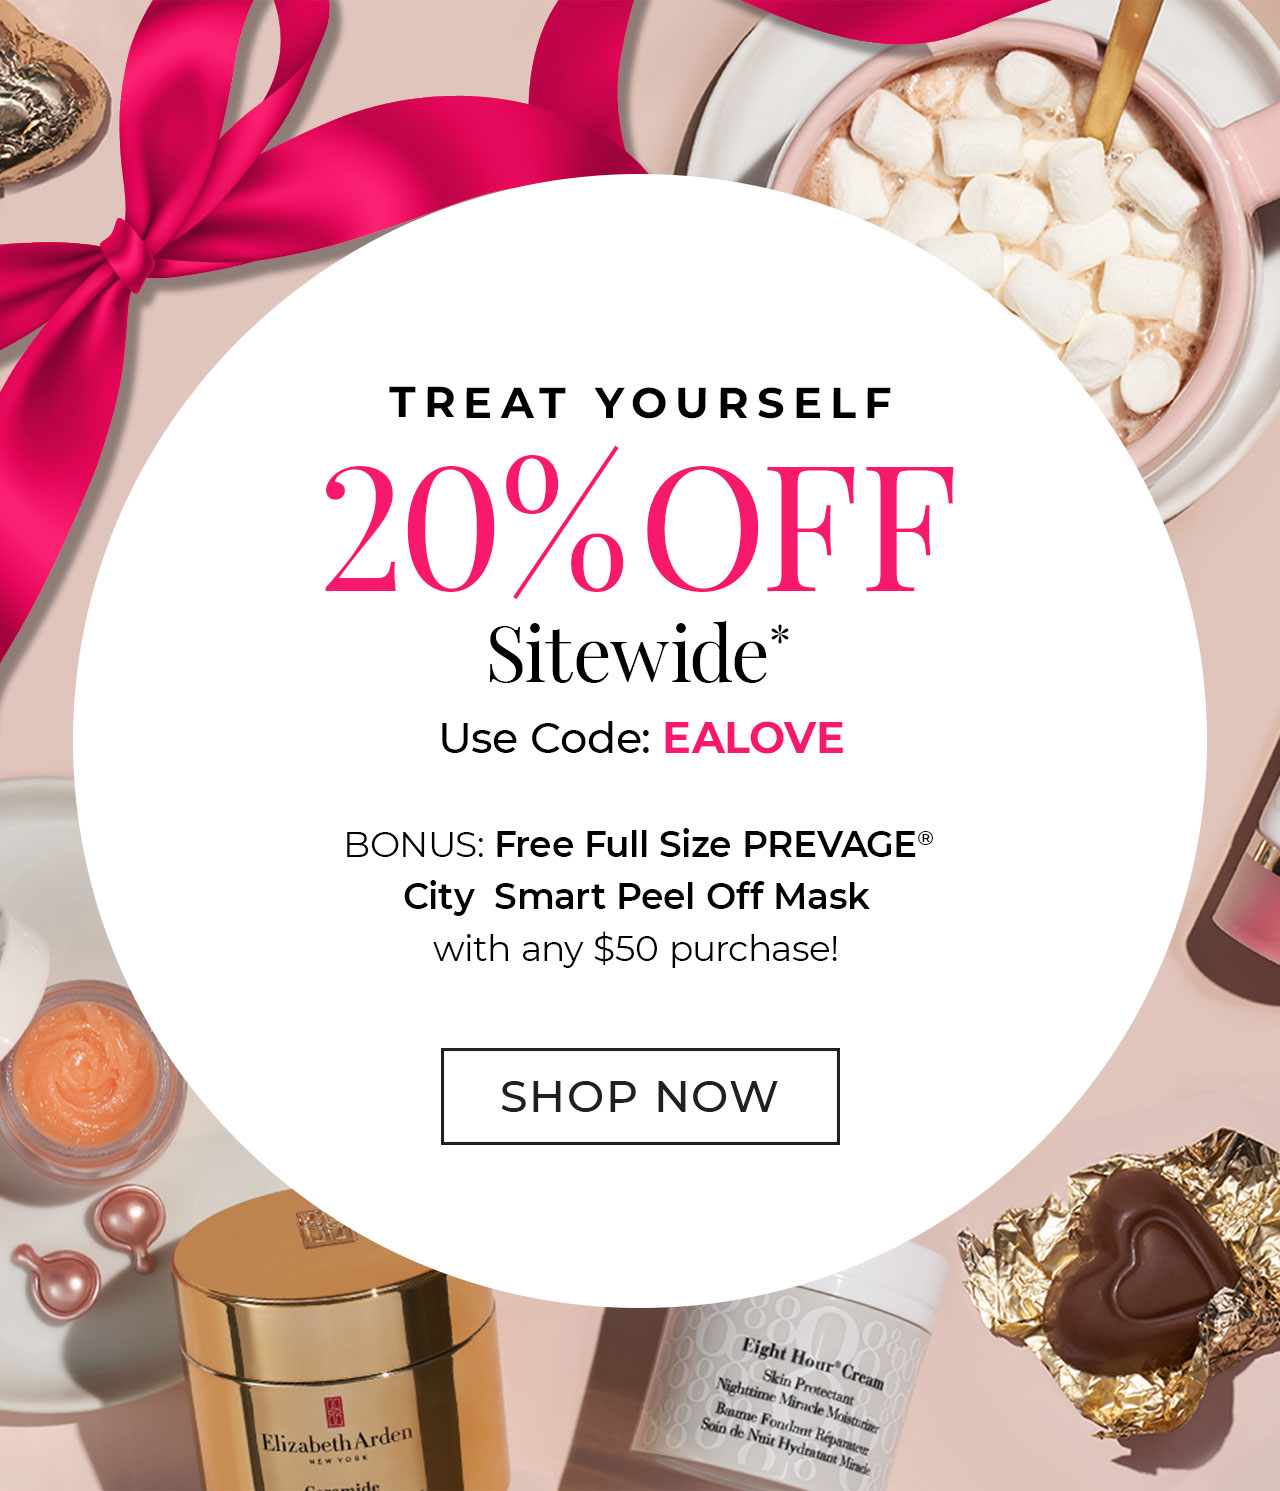 Treat yourself | 20% off sitewide* | Use Code: EALOVE | BONUS: Free Full Size PREVAGE? City Smart Peel Off Mask with any $50 purchase! | Shop Now